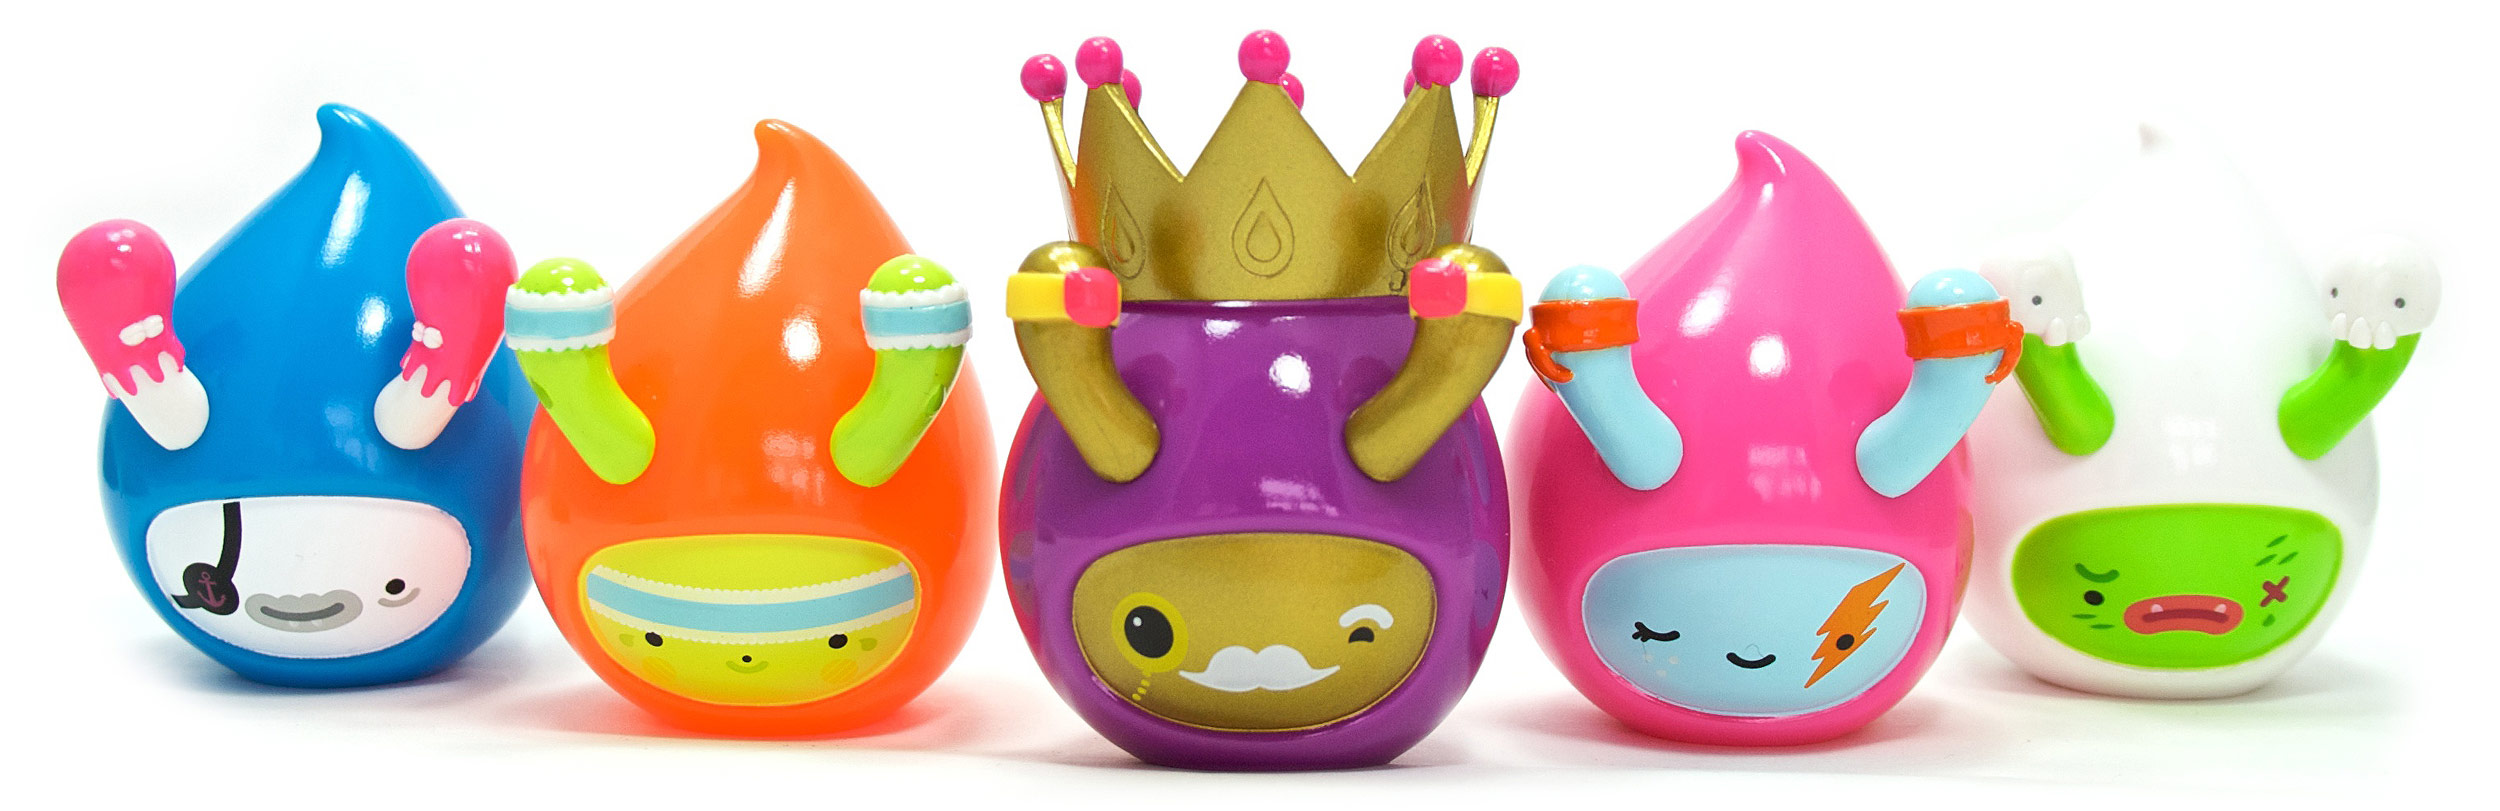 Droplets, vinyl toy characters designed by Gavin